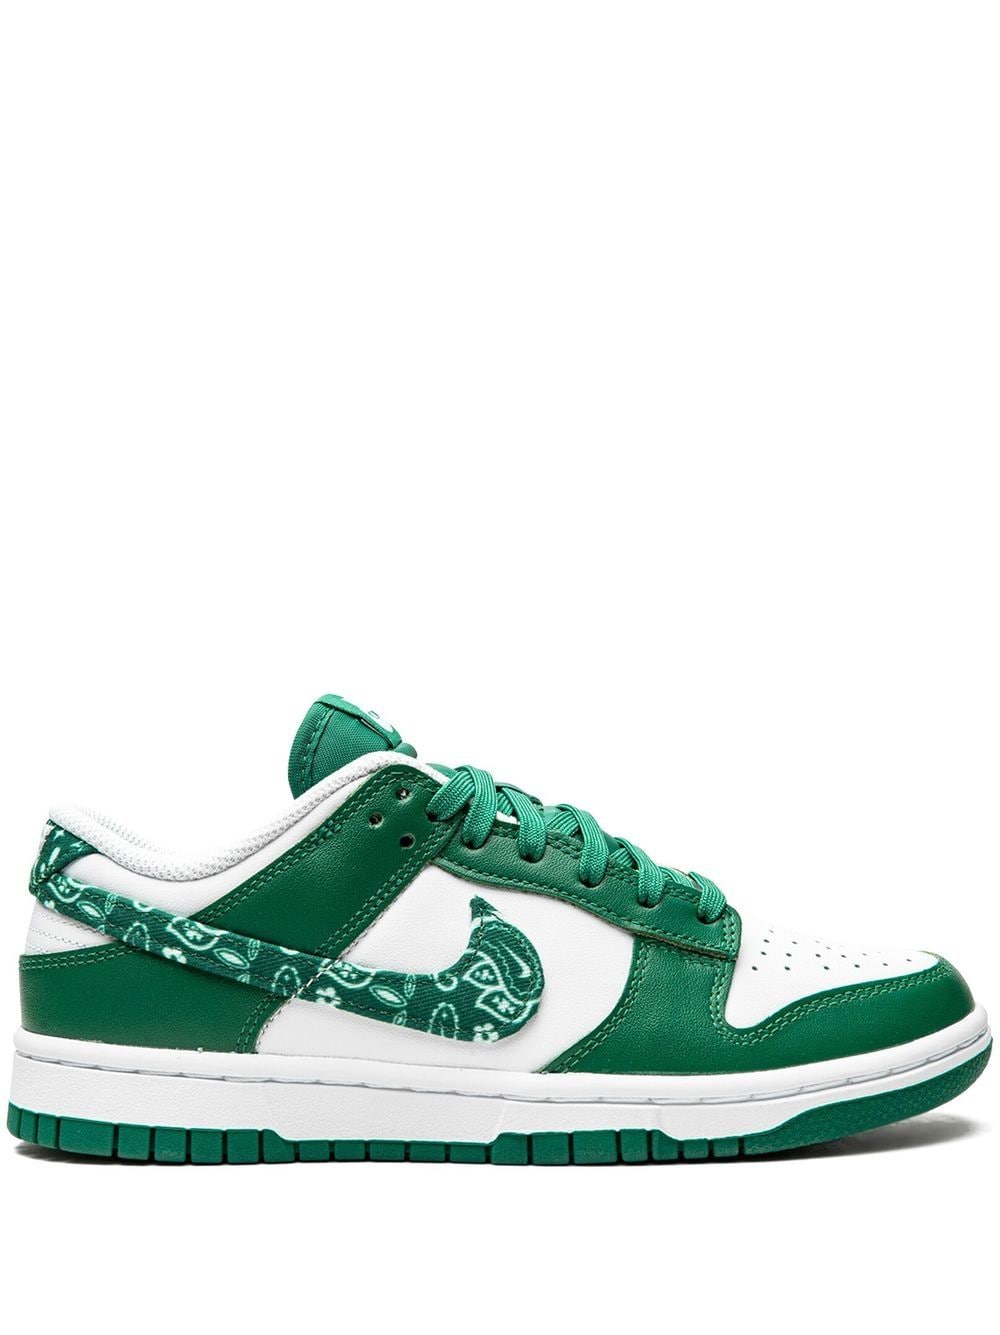 Nike Dunk Low Essential "Paisley Pack Green" sneakers - White von Nike